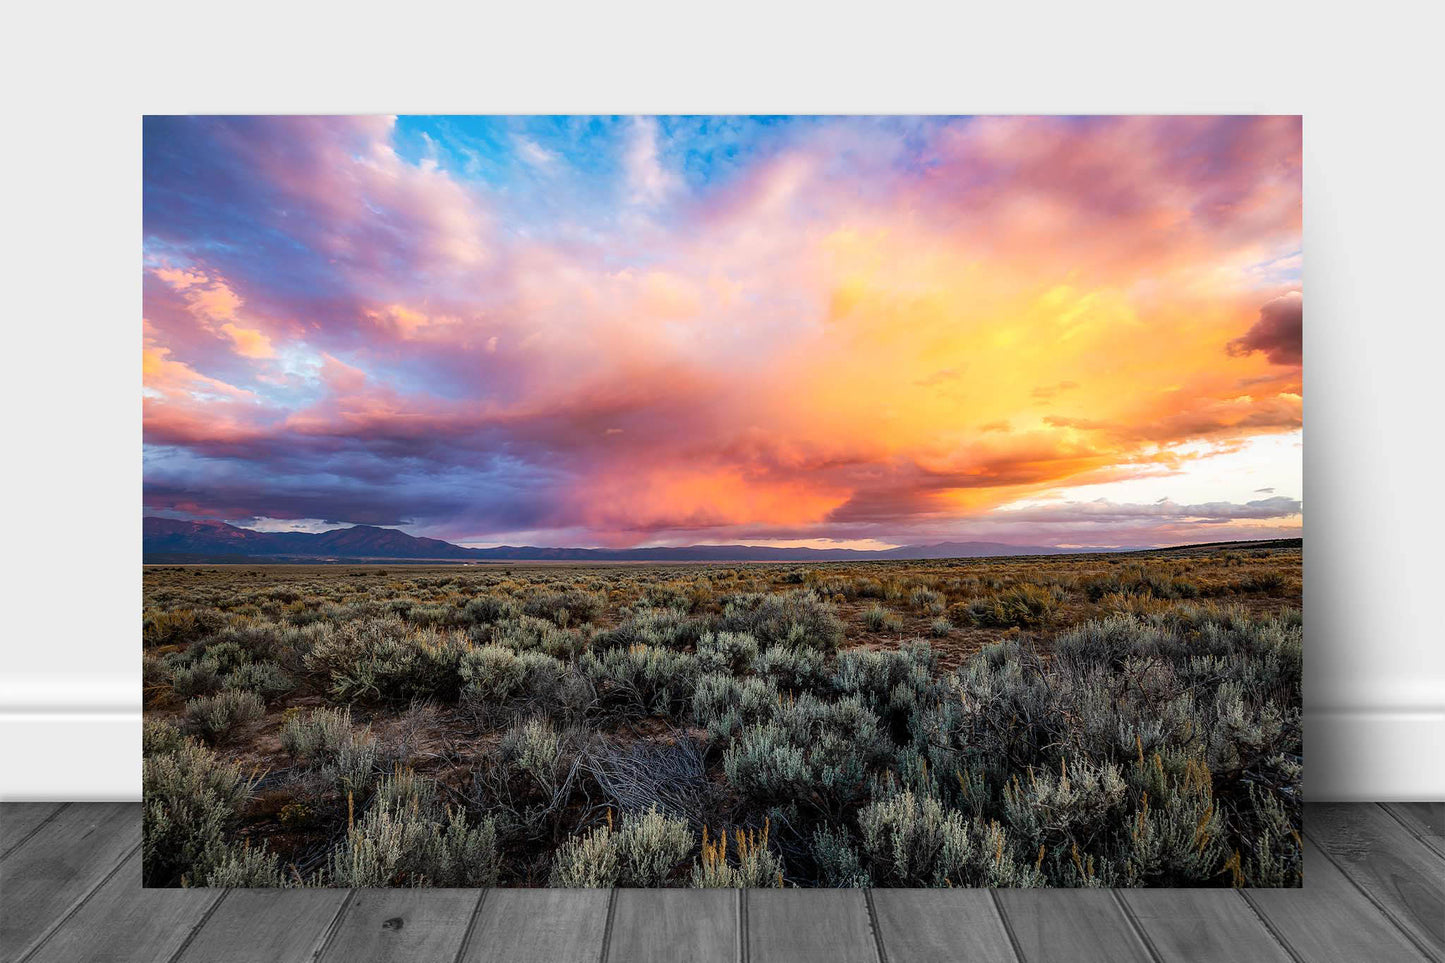 Rocky Mountain aluminum metal print of colorful storm clouds over sagebrush on an autumn evening near Taos, New Mexico by Sean Ramsey of Southern Plains Photography.